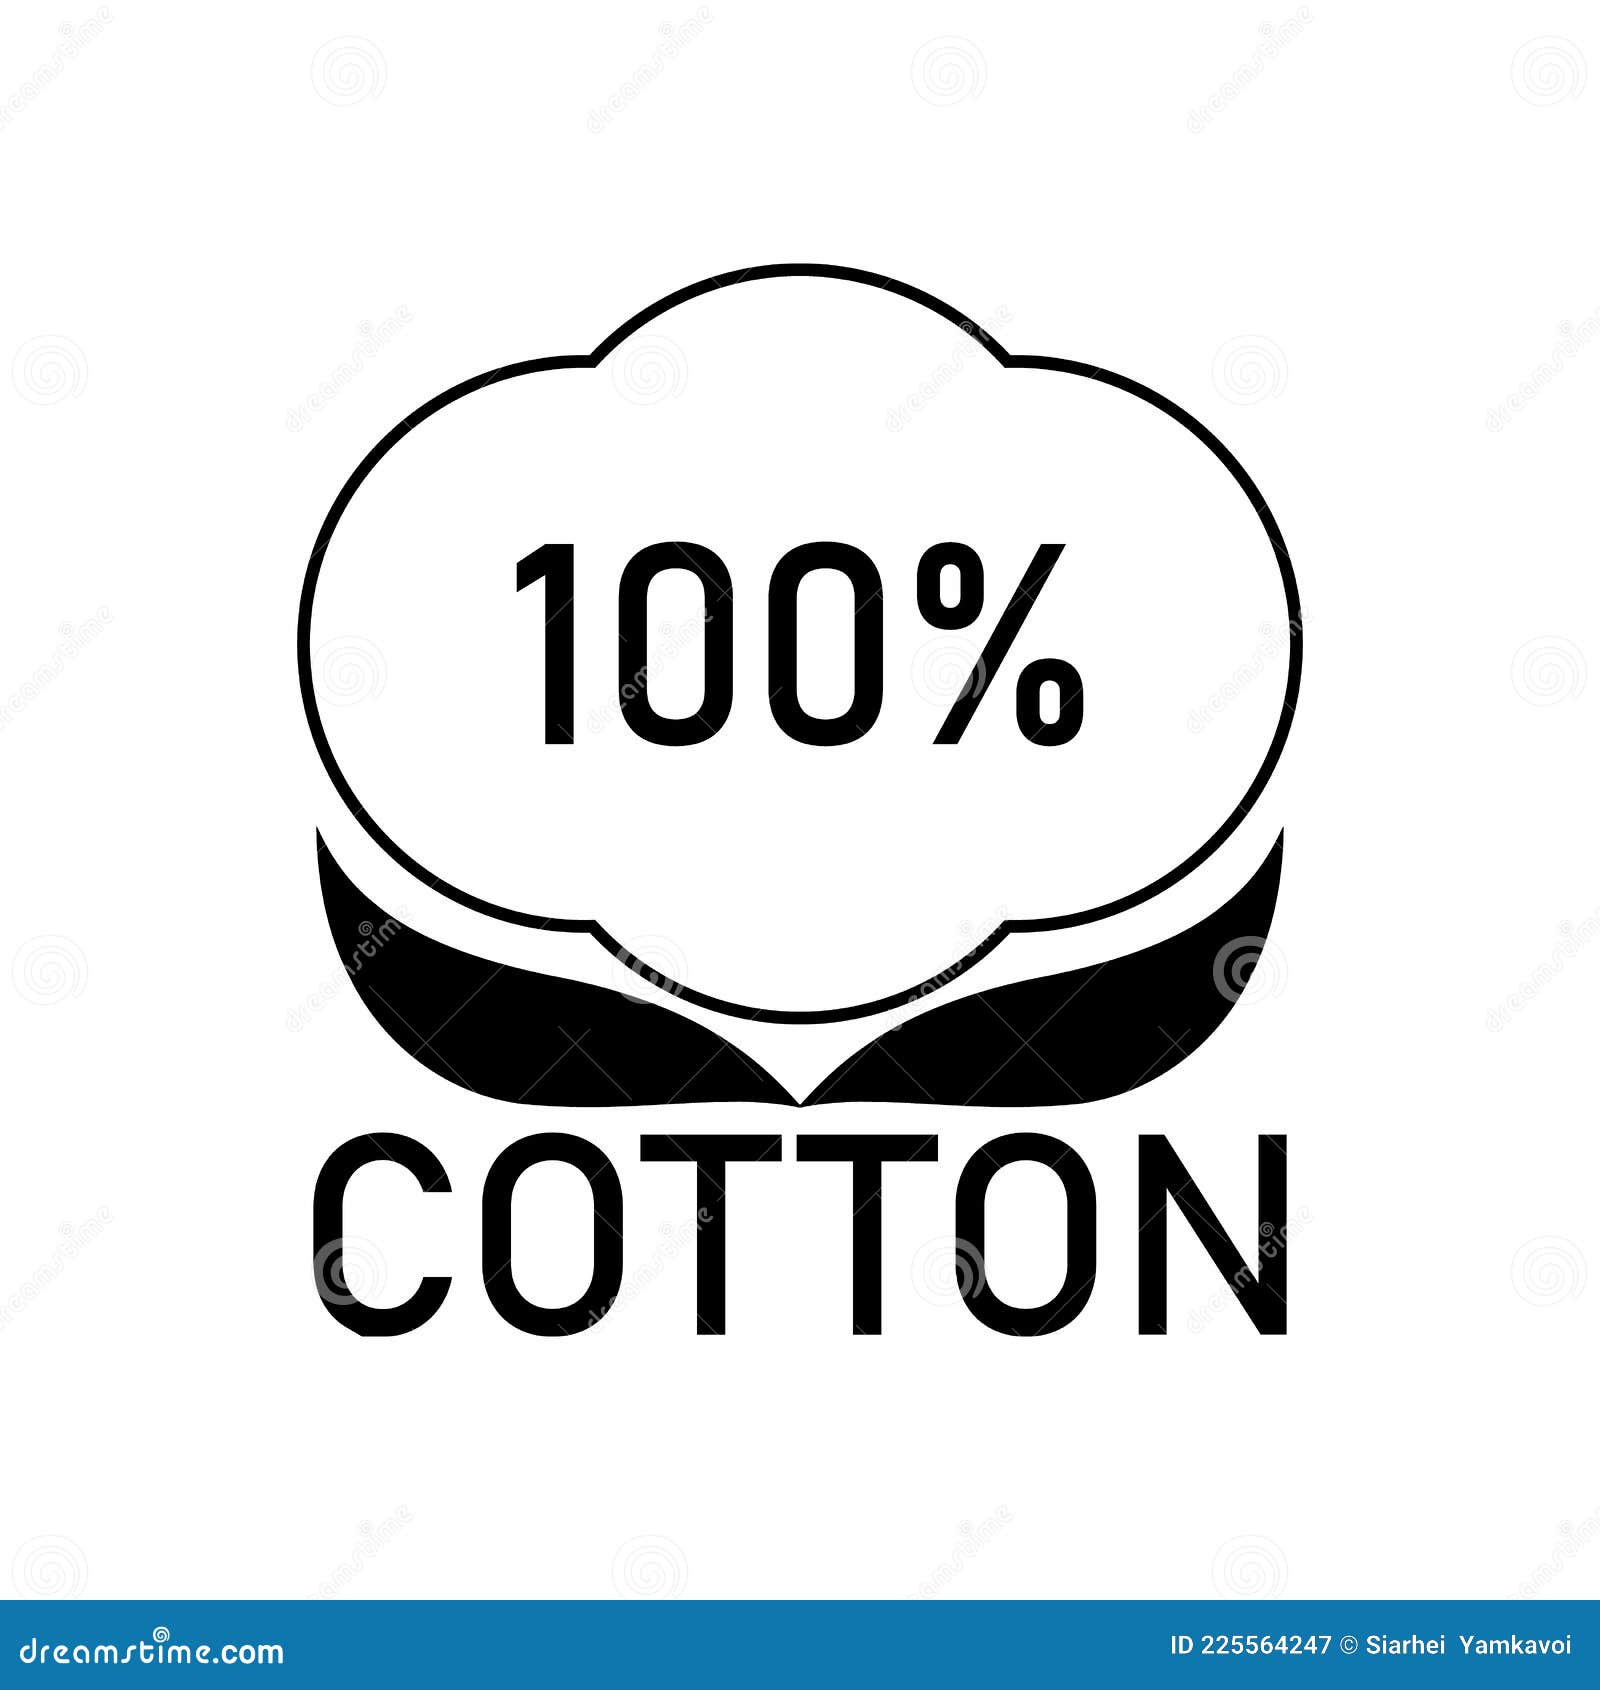 100 Percent Cotton Fabric. Linear Vector Label and Icon on Blank